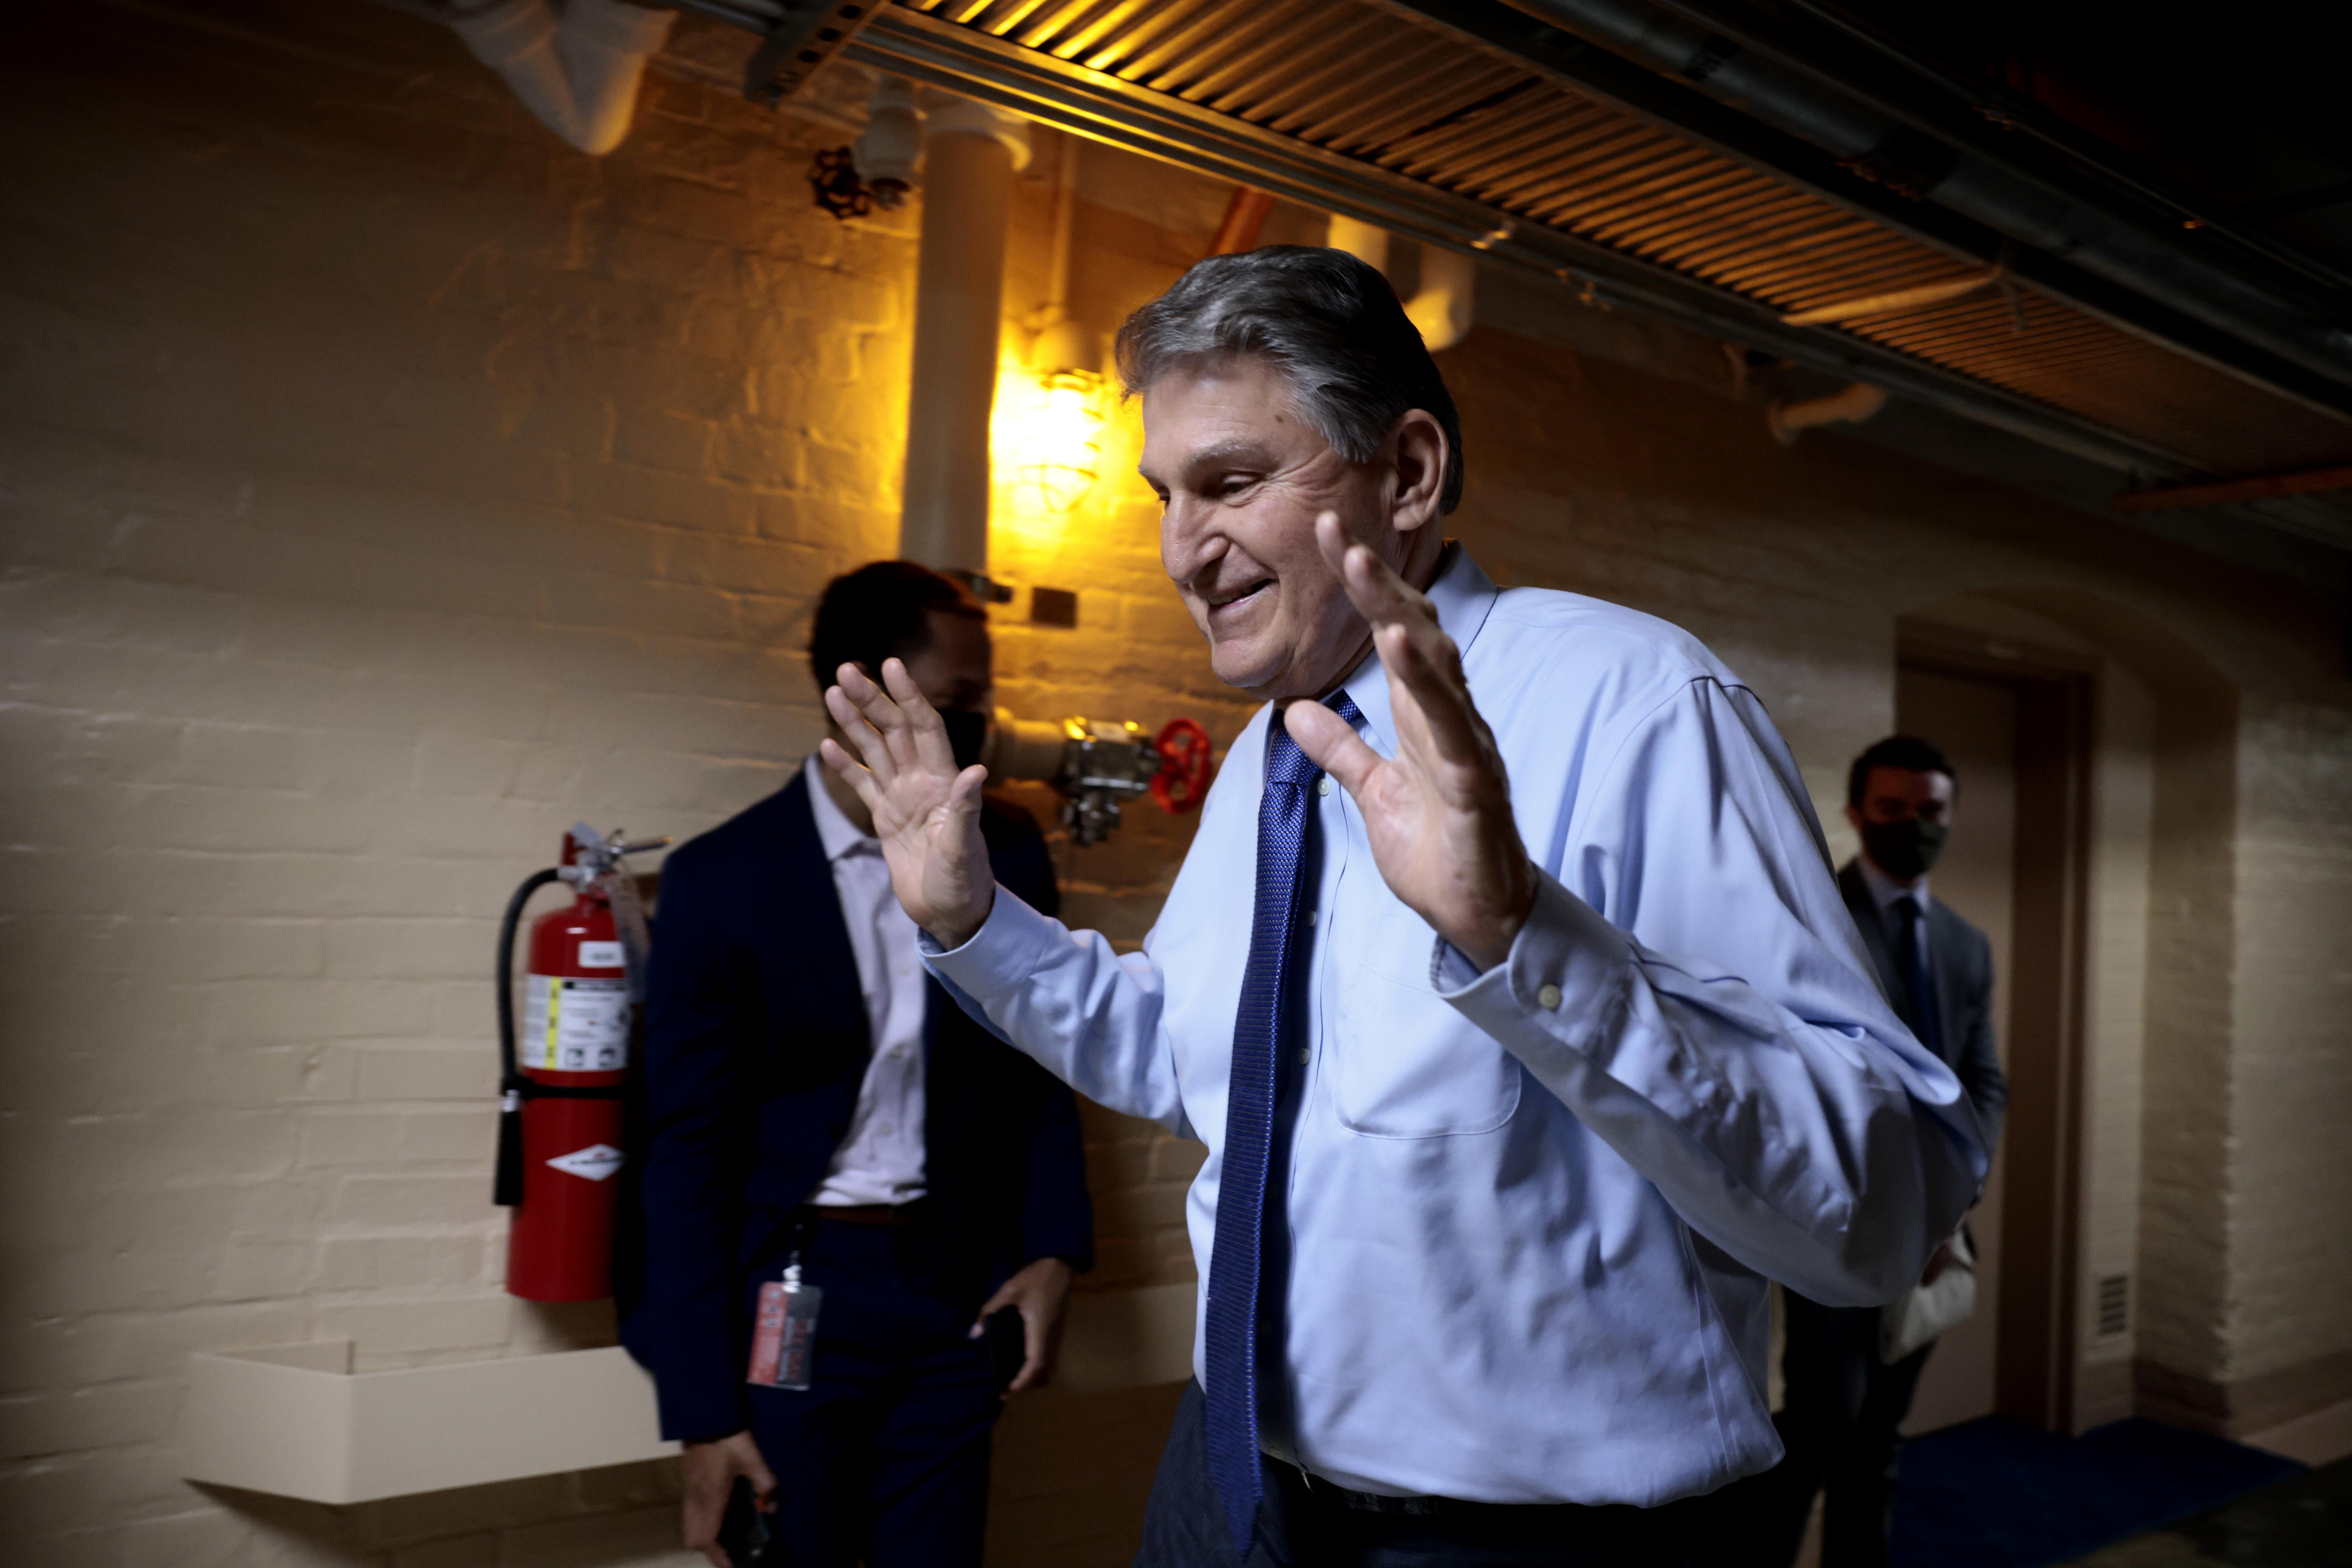 Sen. Joe Manchin walking down a hallway in the basement of the U.S. Capitol Building, with a smile on his face and his hands thrown up in the air. 